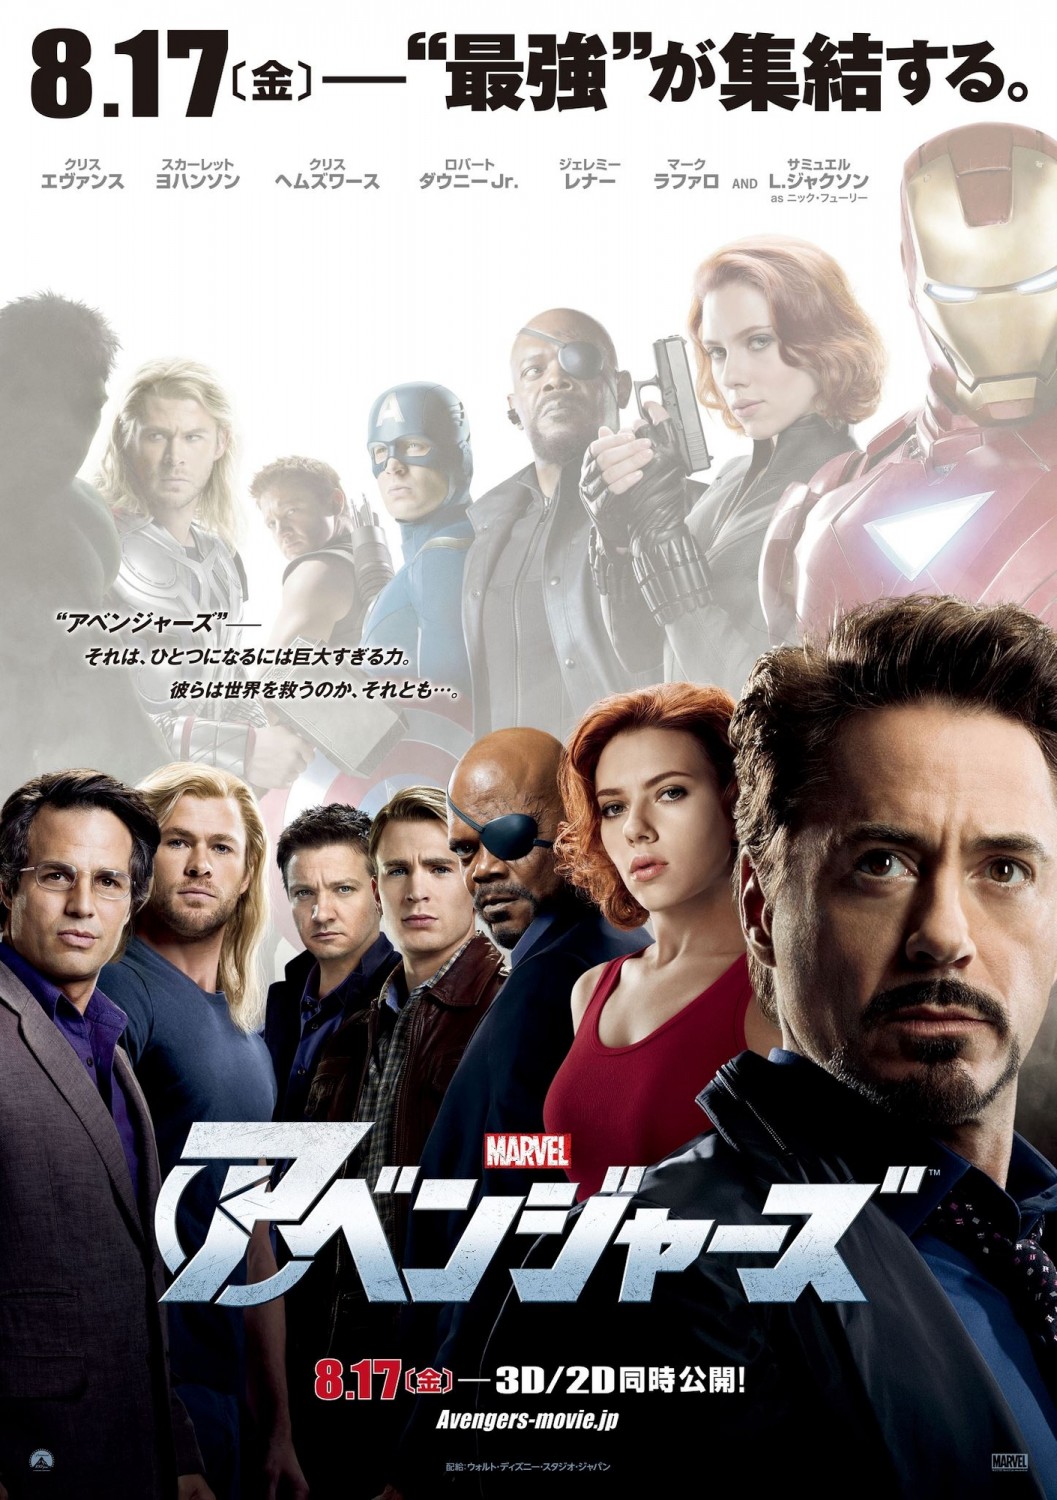 Extra Large Movie Poster Image for The Avengers (#25 of 35)